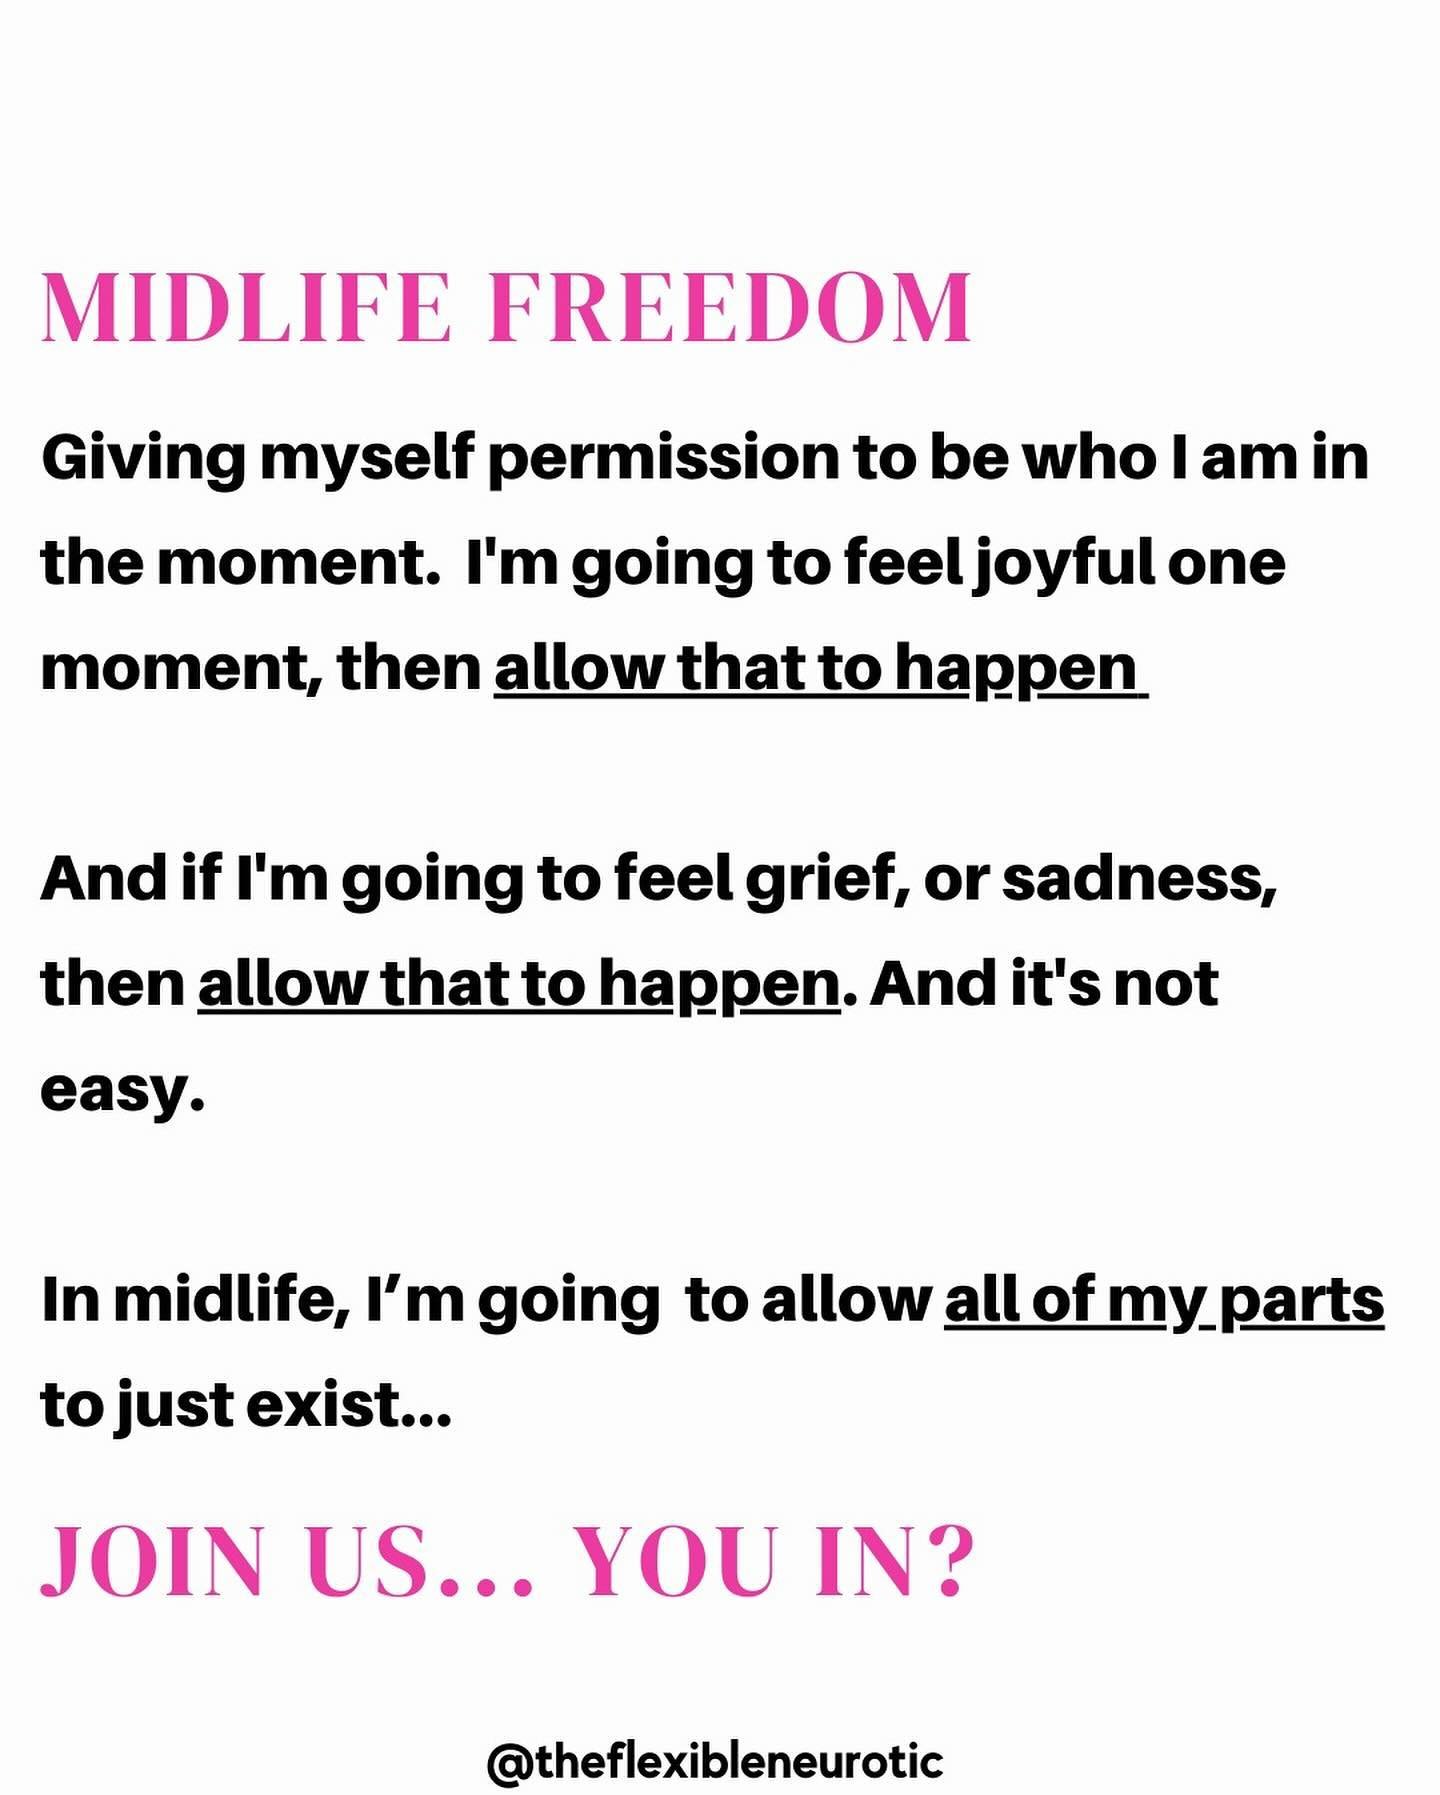 MIDLIFE...LIVING IN THE MOMENT! LIVING FROM THE INSIDE OUT!! MIDLIFE EVERYTHING. 

Get ready.  Ready to embrace a mindset that promotes ease and intuition? Wanna talk about midlife marriage? Then this episode is definitely for you! 

This is a juicy 